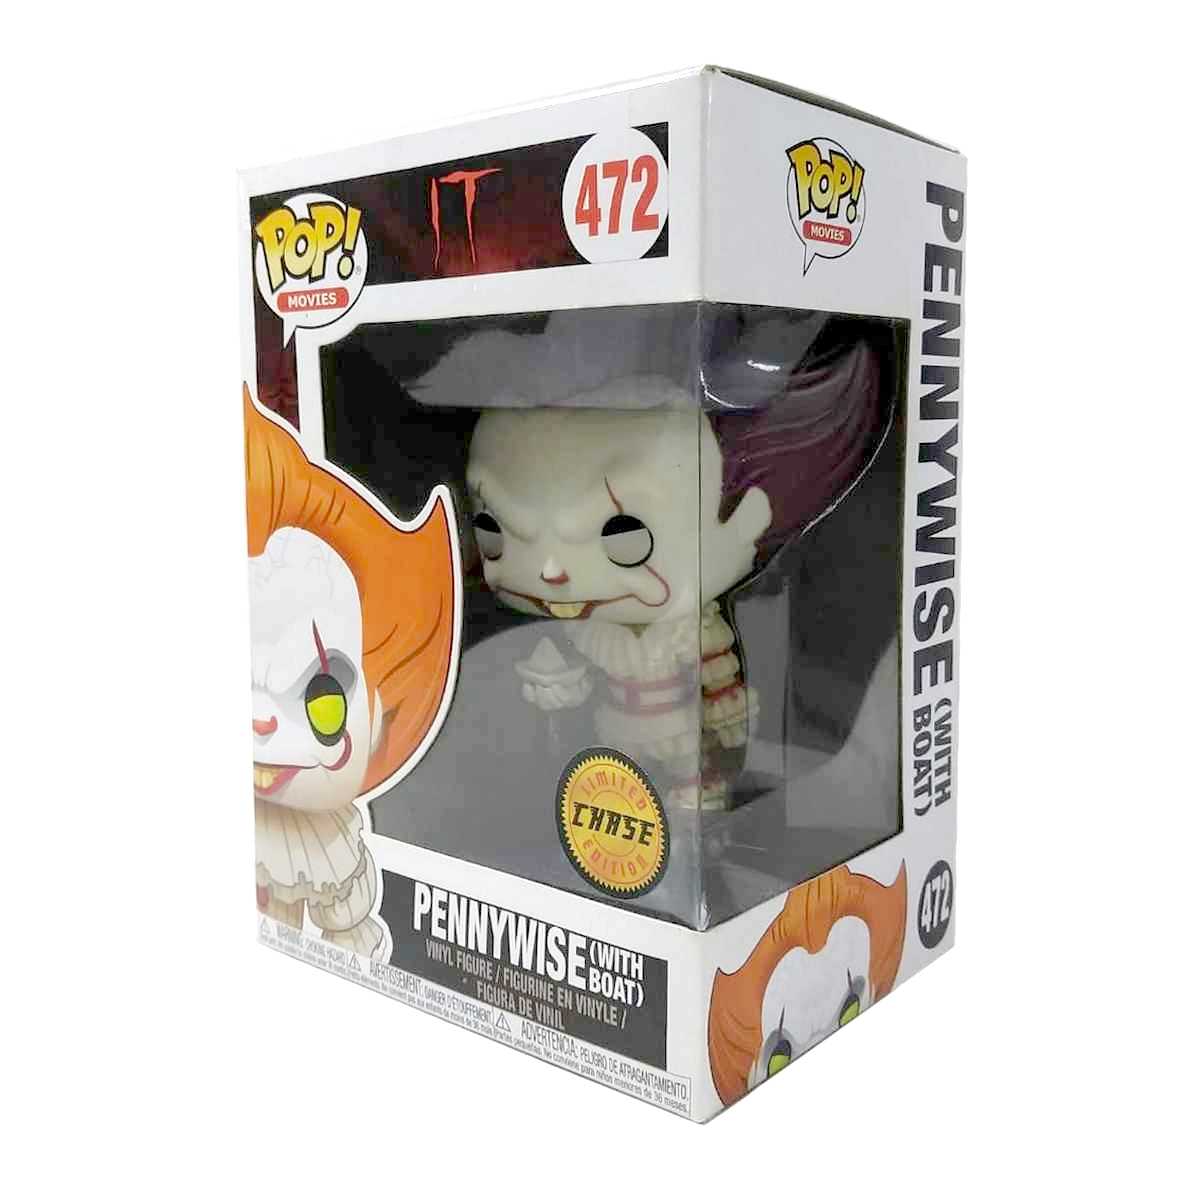 Funko Pop Movies IT CHASE A Coisa Pennywise with boat SEPIA vinyl figure número 472